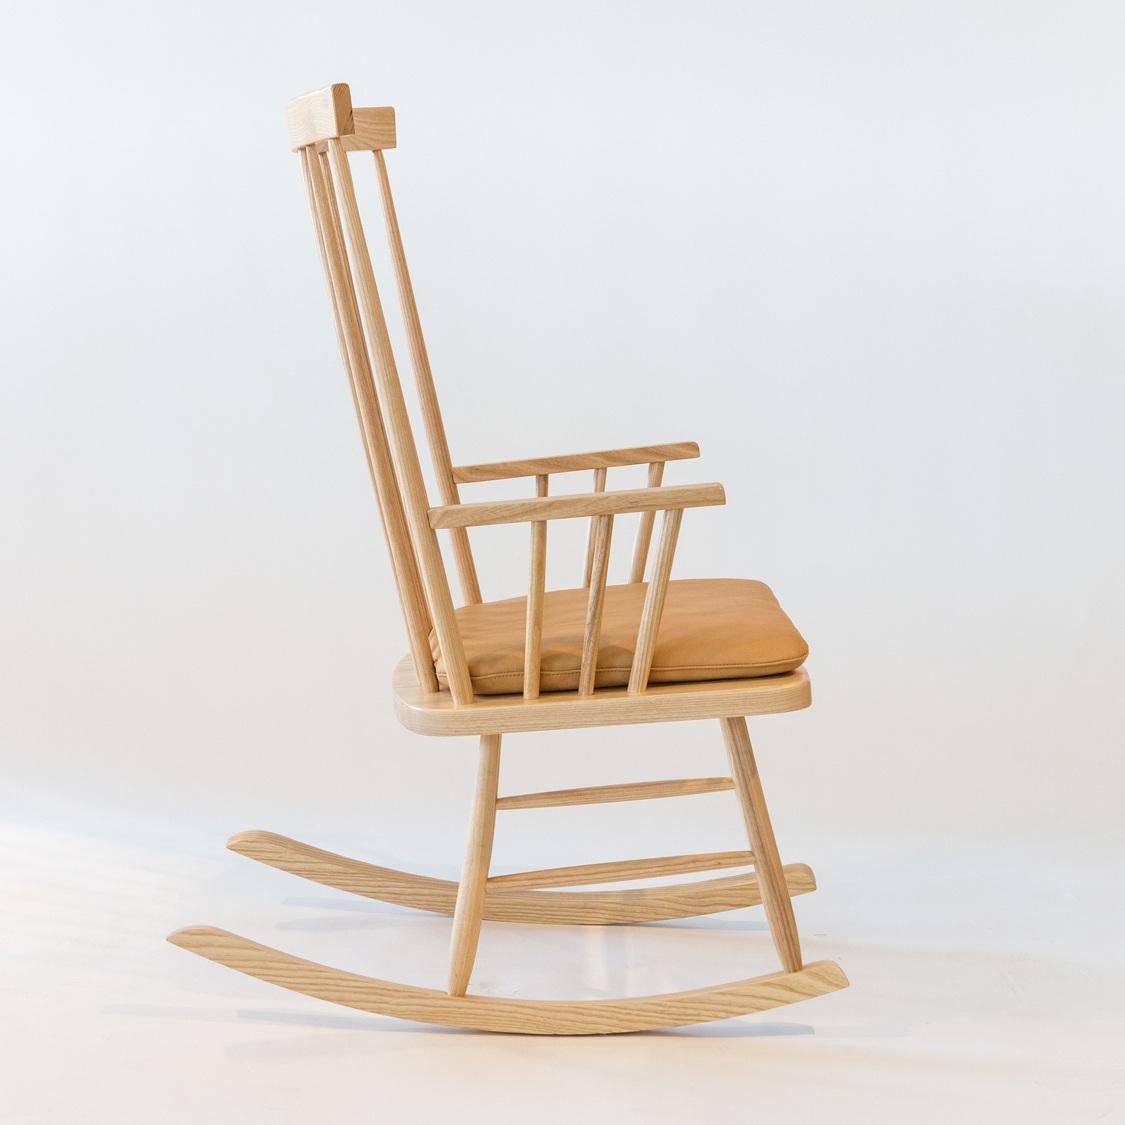 Originally designed by Mel Smilow in 1960 and officially reintroduced by his daughter Judy Smilow in 2016, the Classic Rocking Chair was featured in the American Pavilion at Expo 1967 and has withstood the test of time. The simplistic beauty, fine